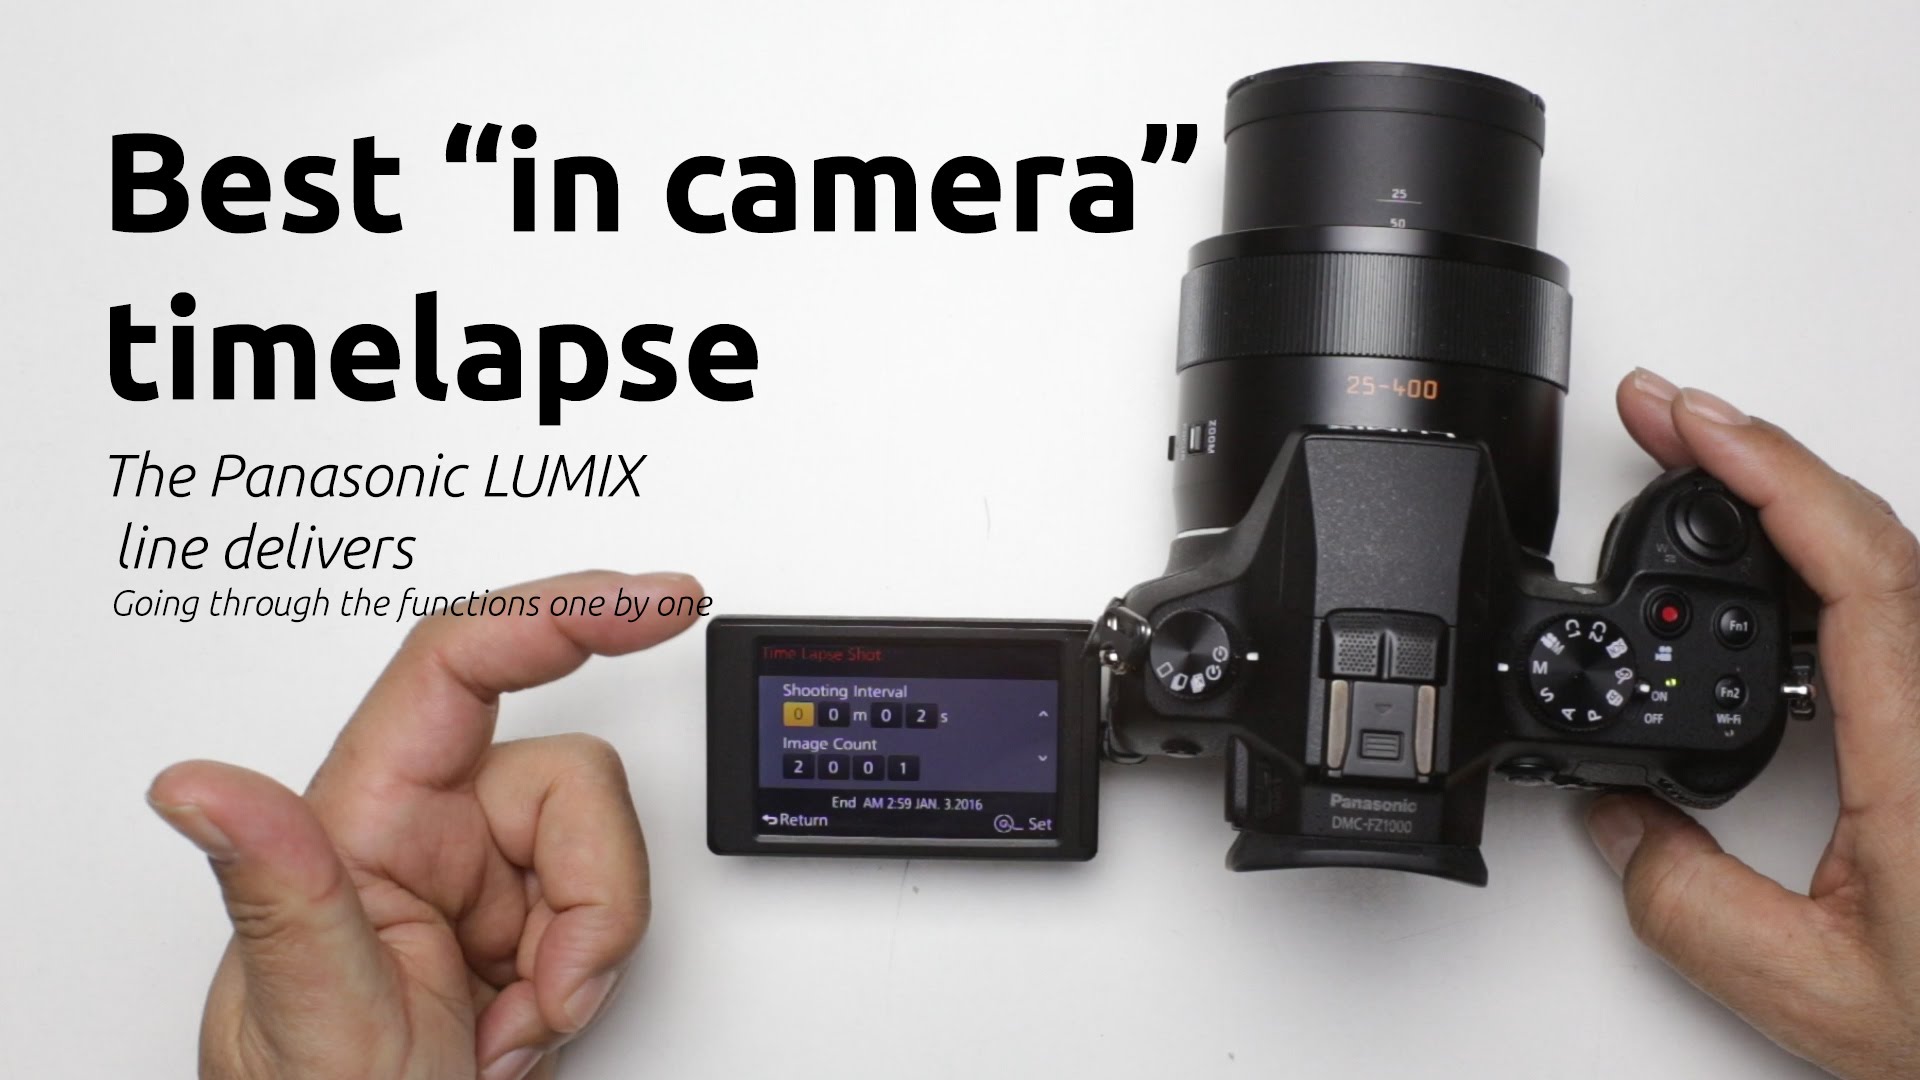 Best in camera time-lapse. The Panasonic LUMIX line delivers!